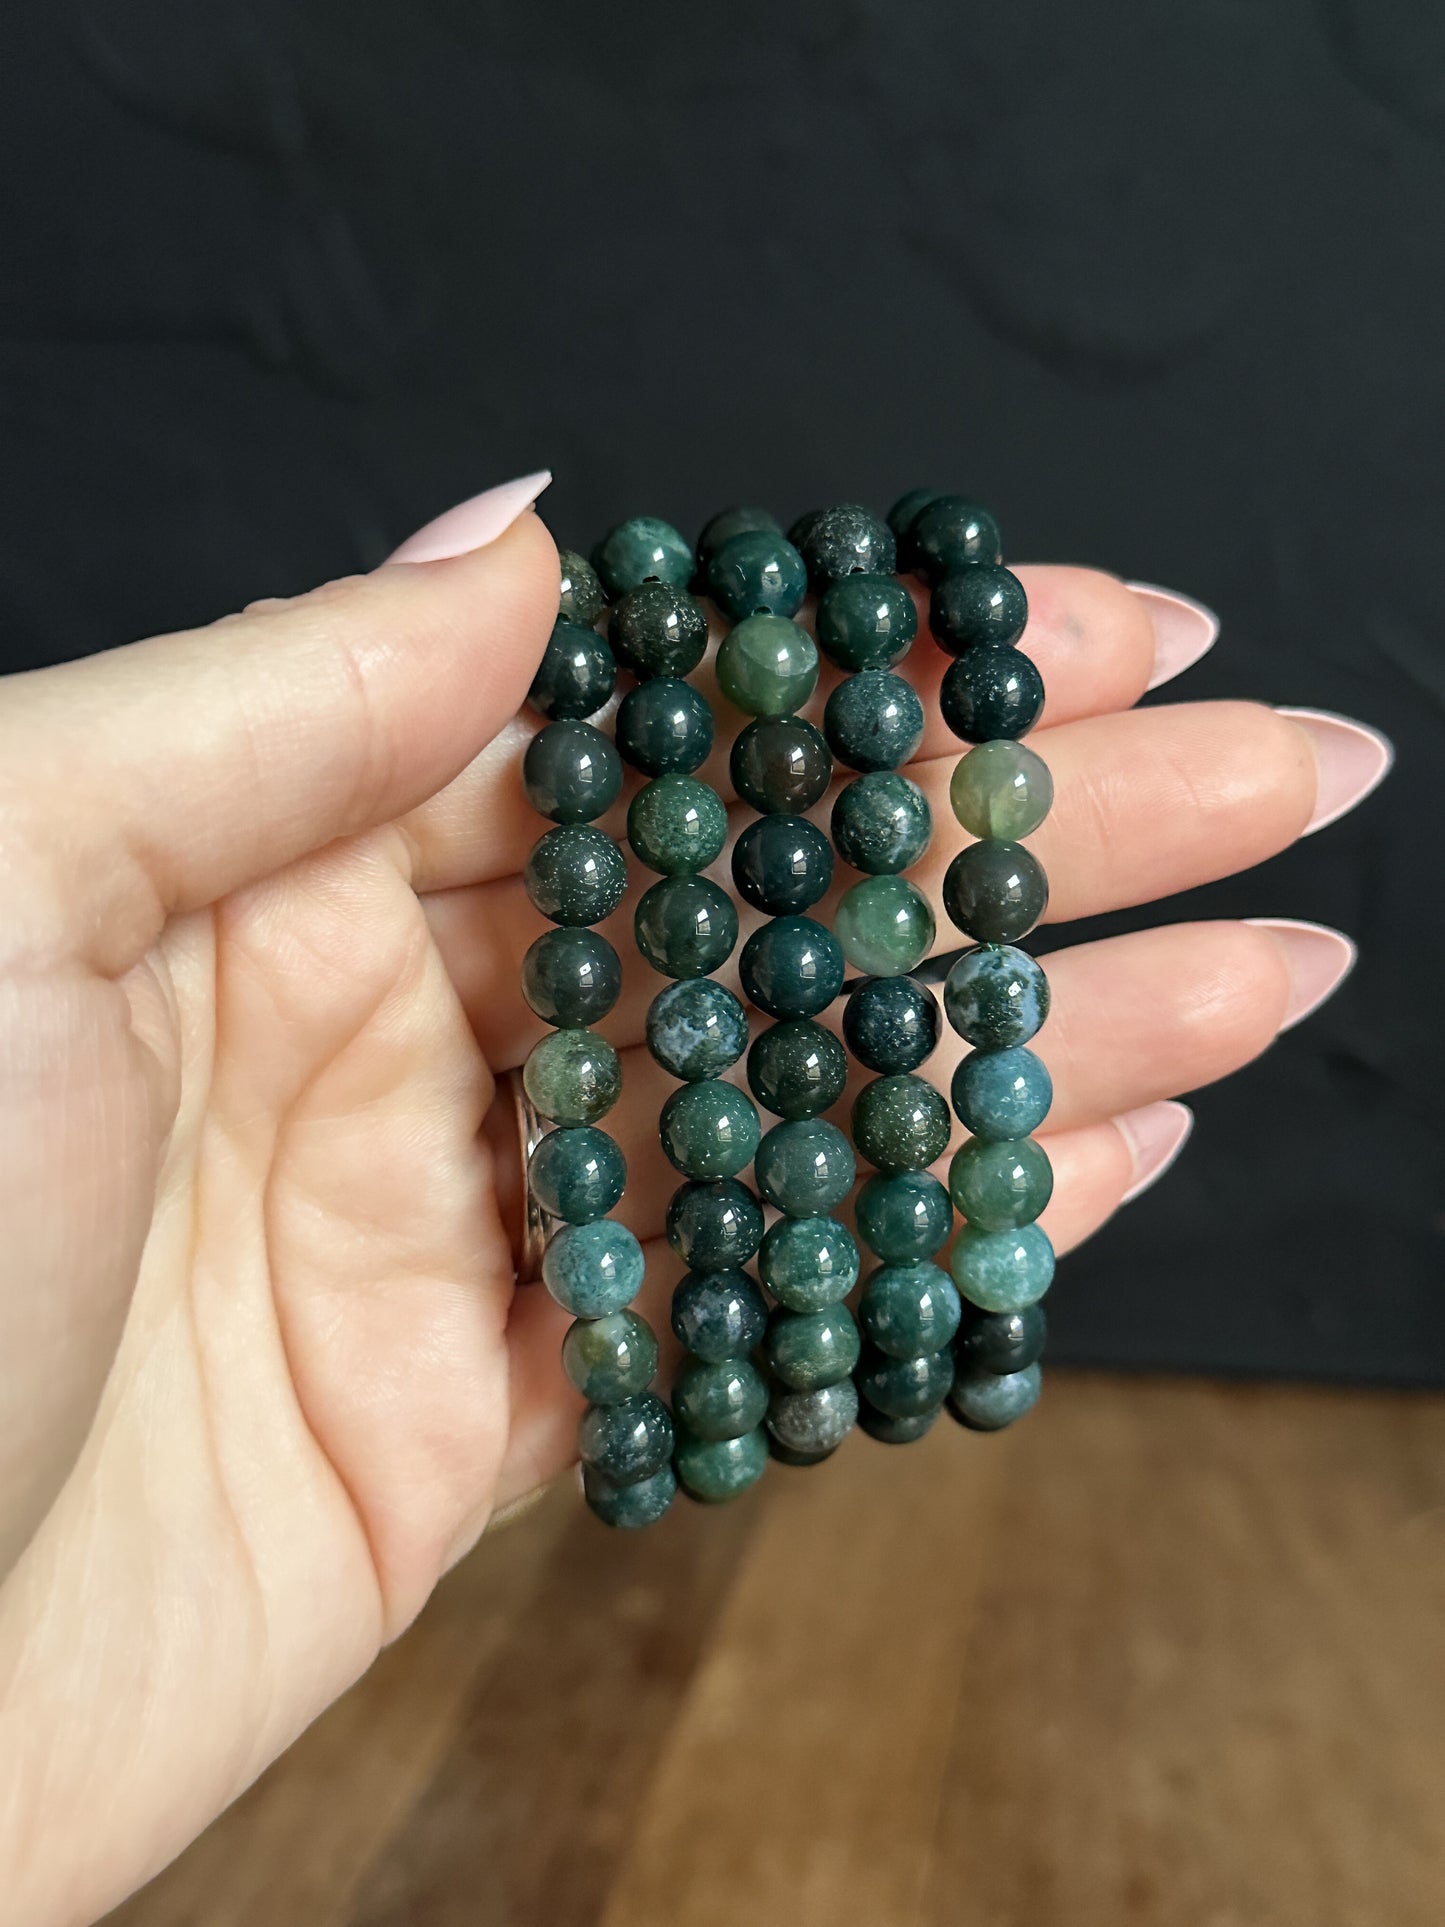 It is a perfect way to carry your favourite healing crystal/gemstone with you all day long! This bracelet is perfect by itself or even stacked with others. These are The Stone Maidens 8mm Moss Agate Bracelet 